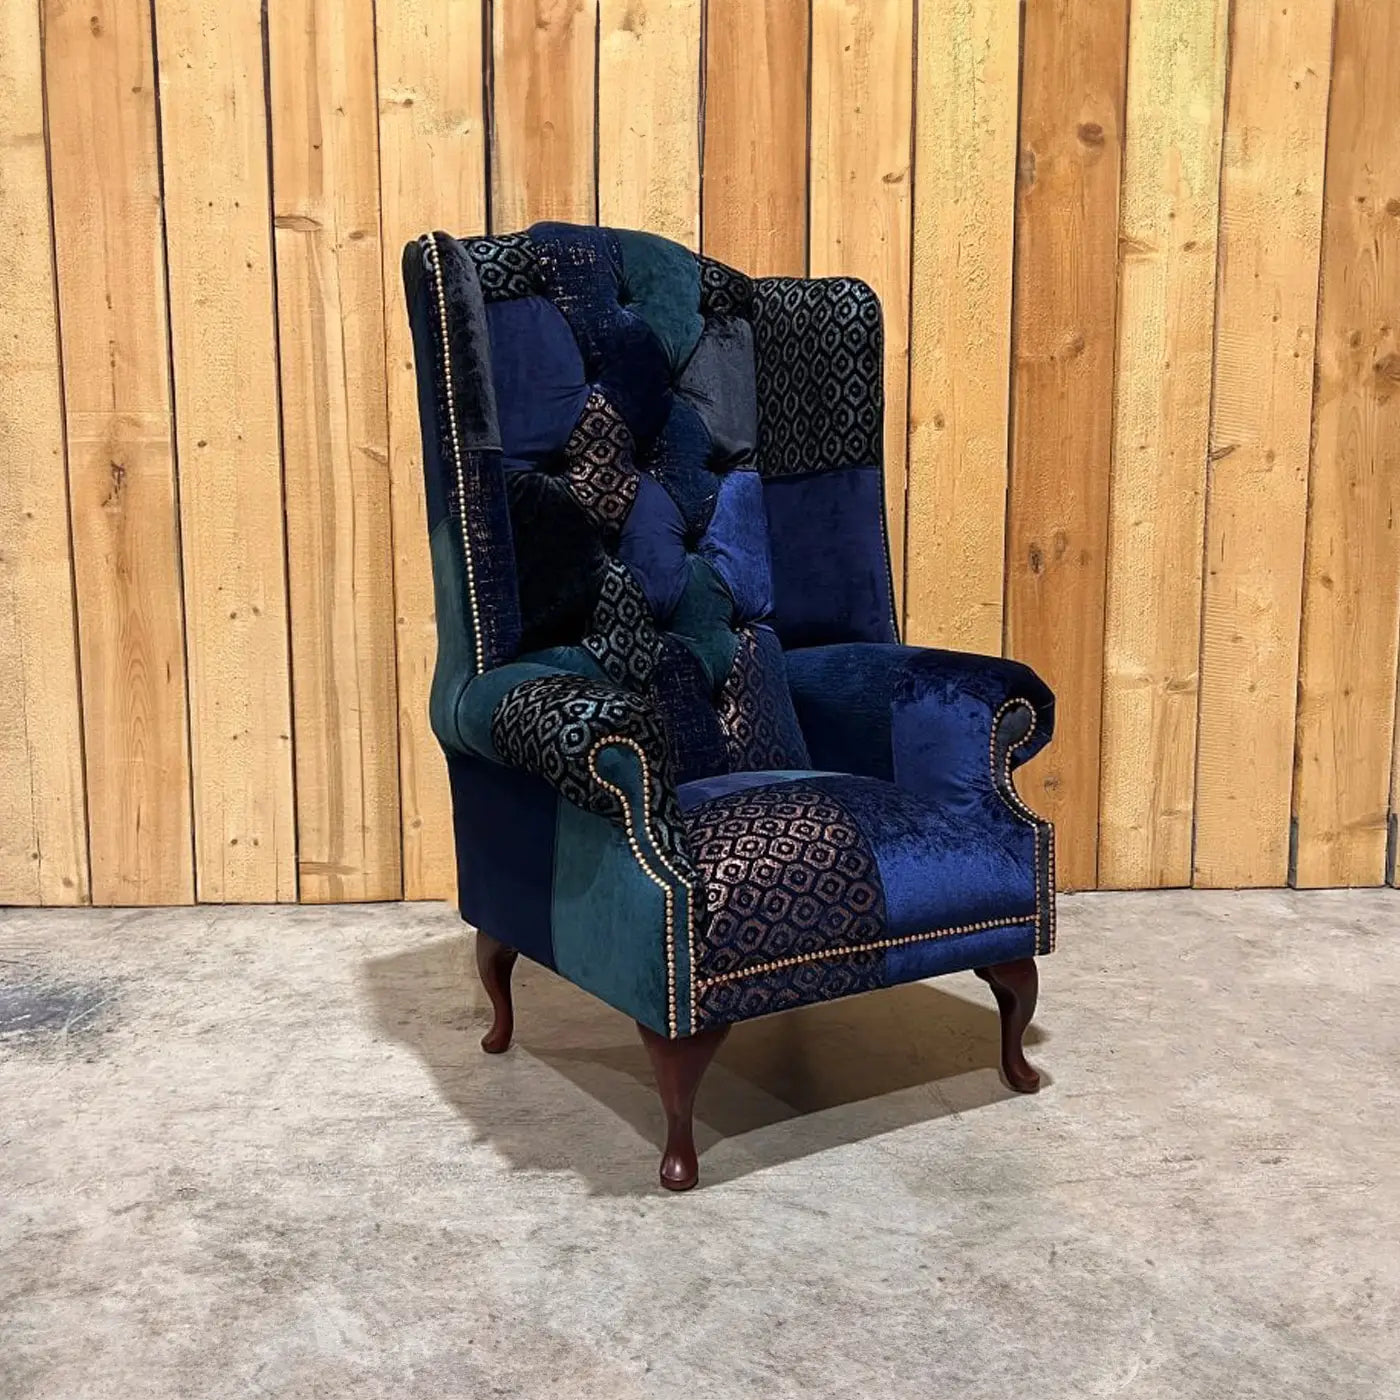 Oswald & Pablo Dorset Patchwork Velvet Chesterfield Wing Chair